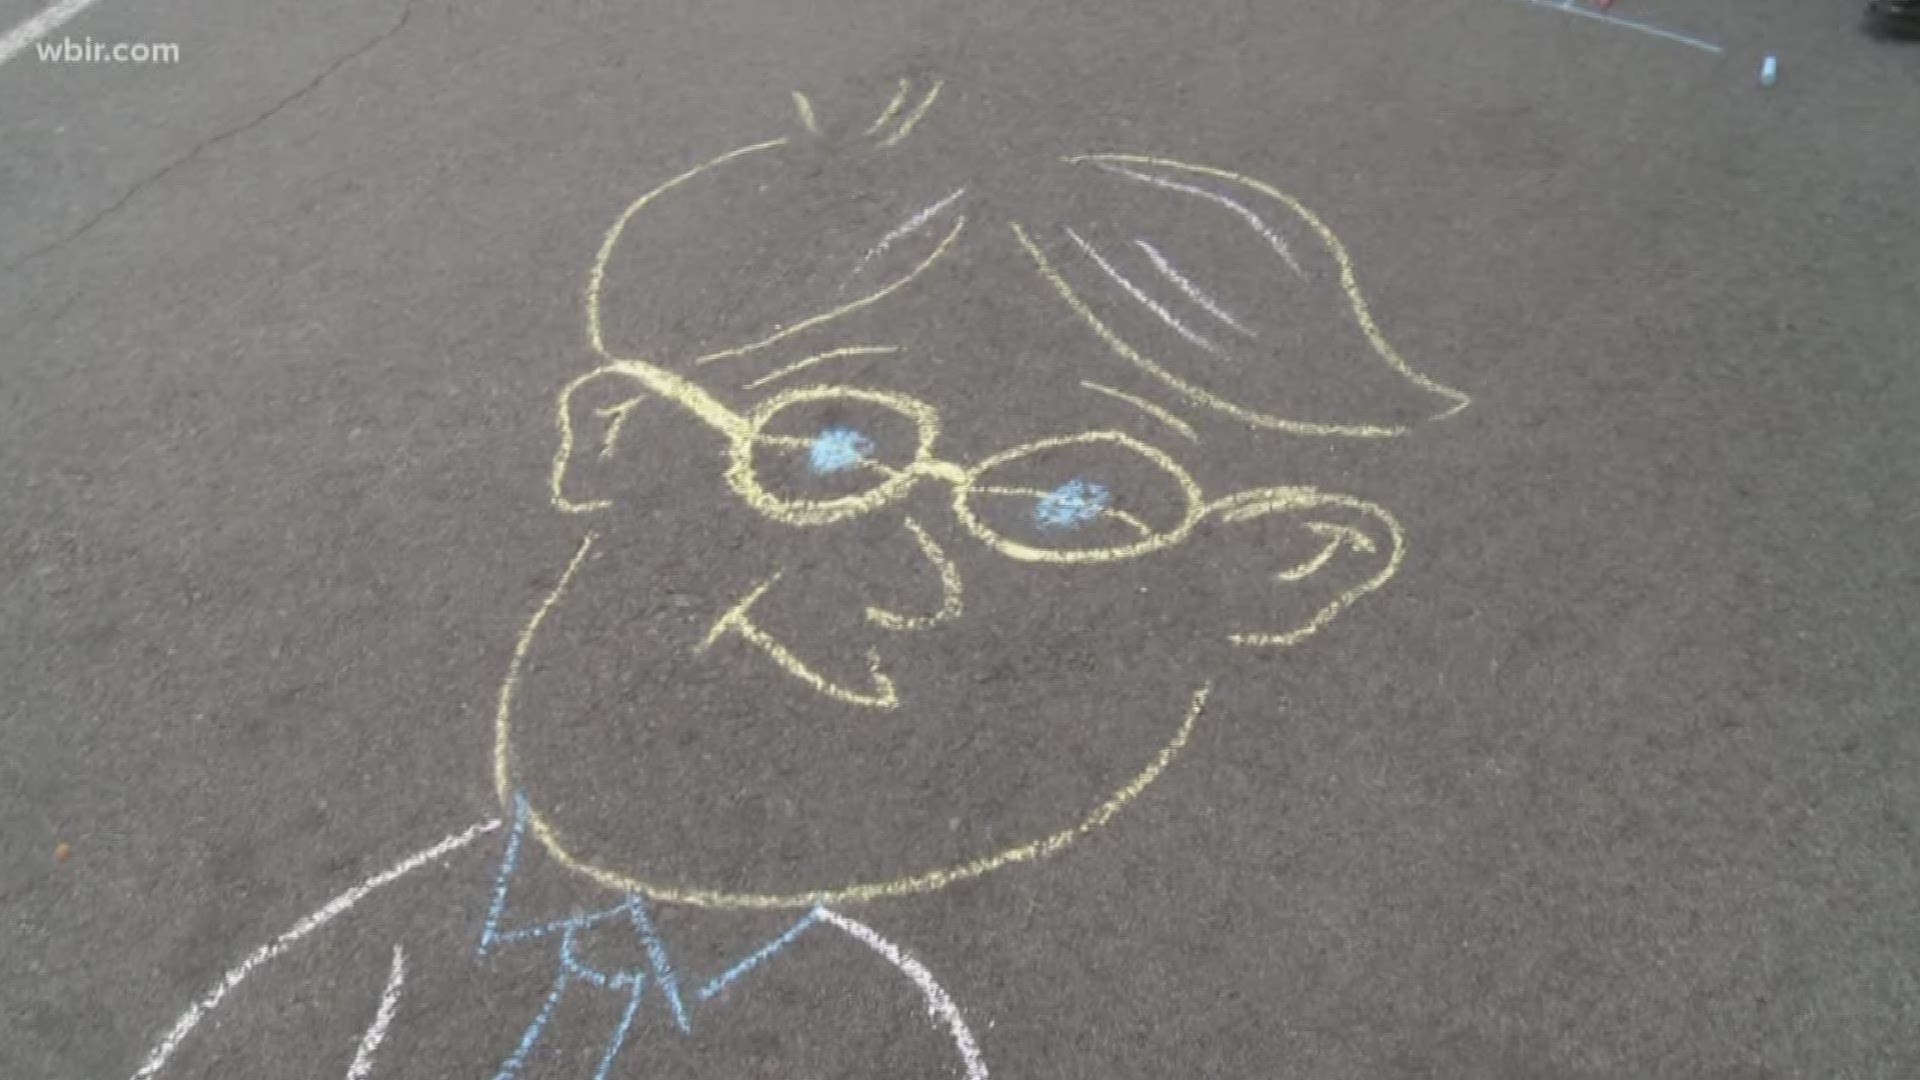 The Live at Five at Four crew had a one minute competition to draw the best piece of art they could with chalk, ahead of the Dogwood Arts Festival's ChalkWalk on Saturday. Date: April 19, 2018